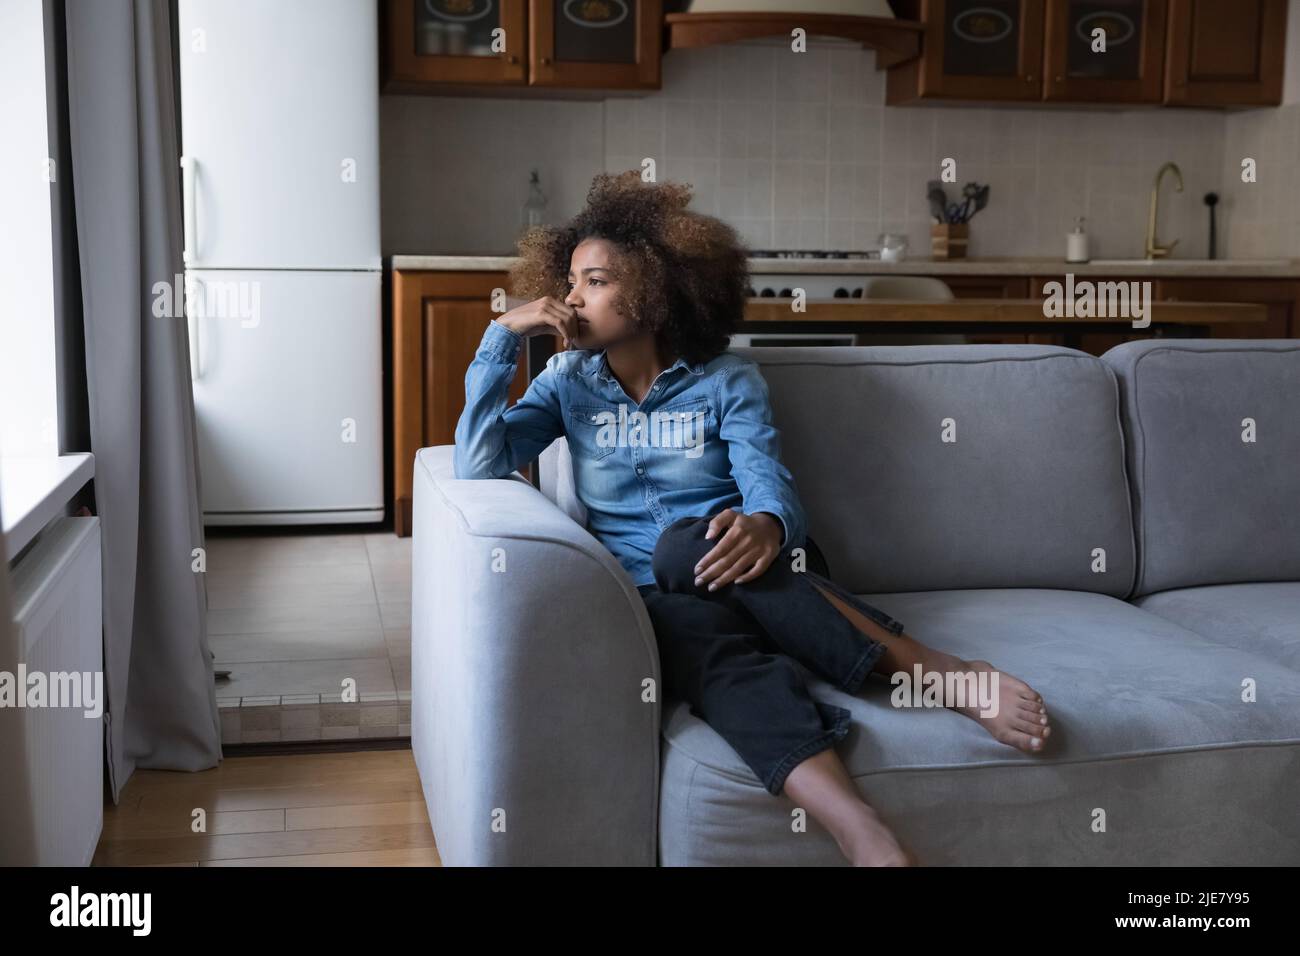 Sad African teen girl sit on sofa lost in thoughts Stock Photo